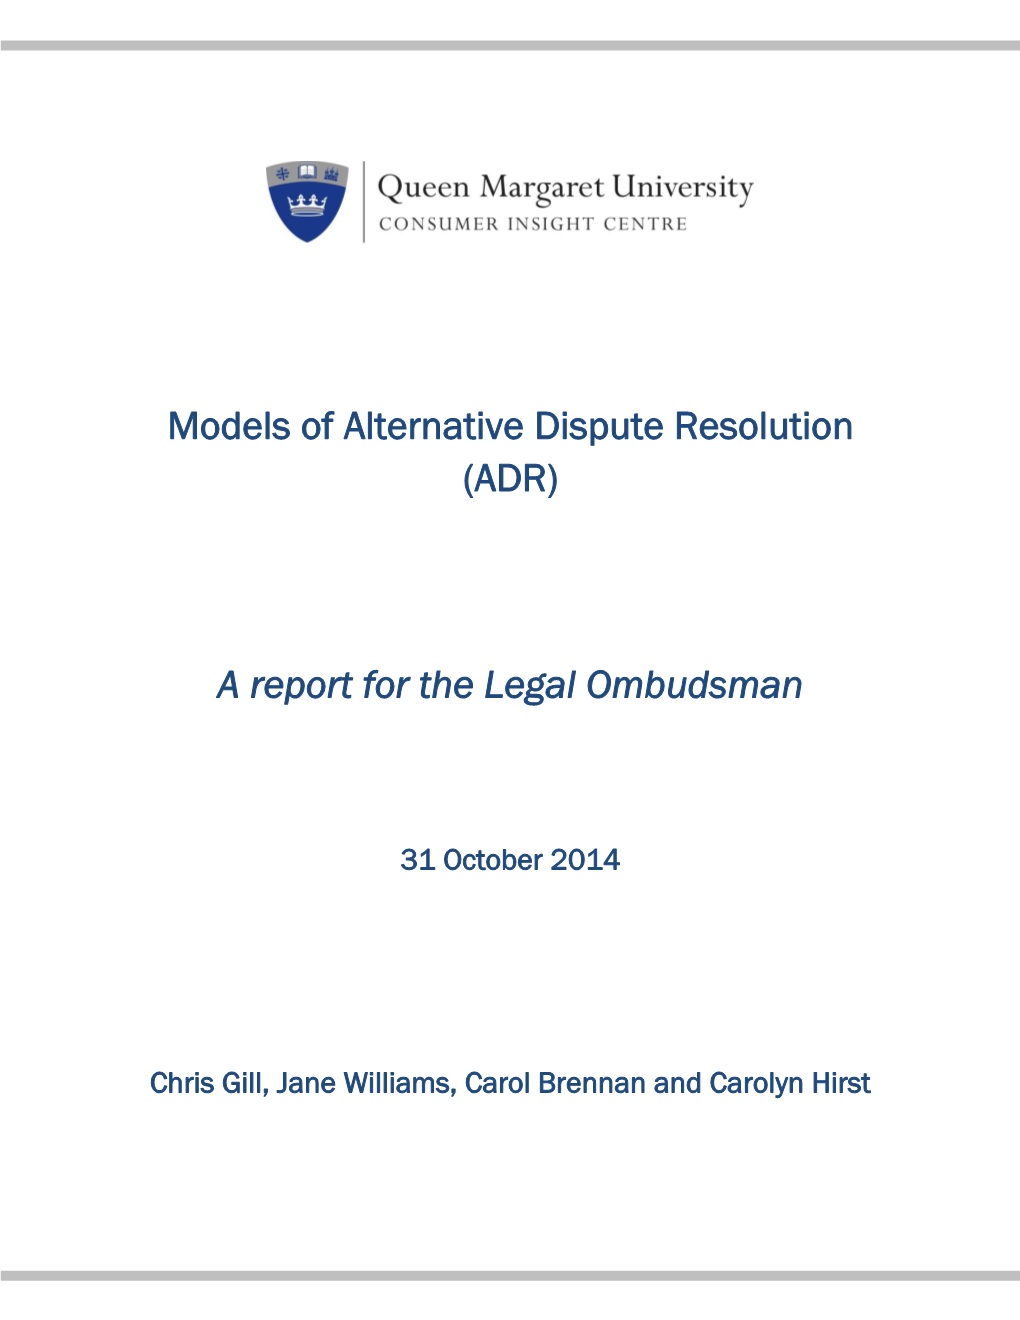 Models of Alternative Dispute Resolution (ADR) a Report for The